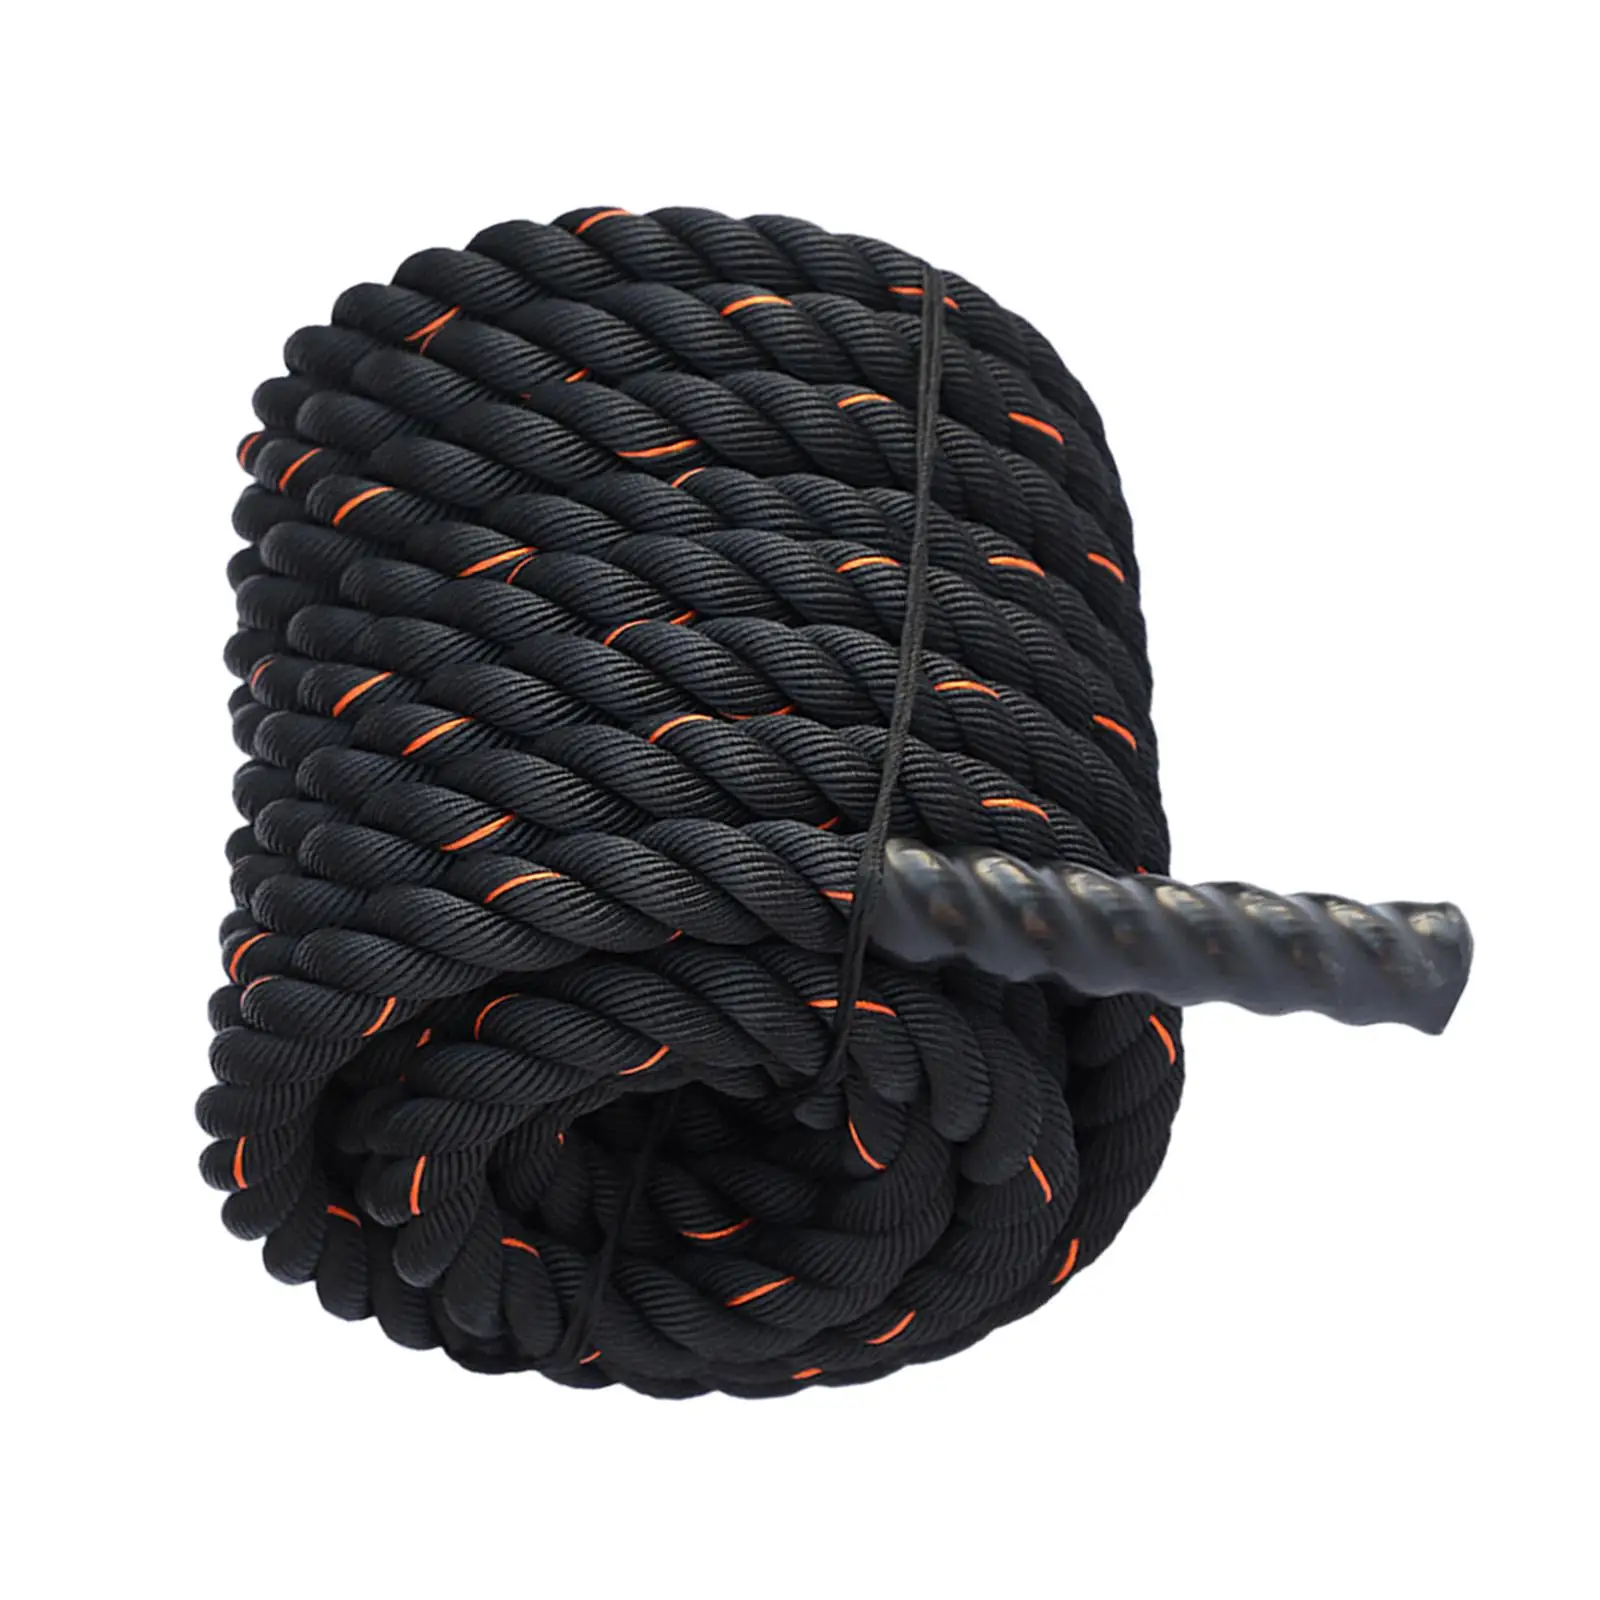 Battle Exercise Training Rope 2.8M/3M Workout Rope for Workout Battling Home Improve Strenght Training Fitness Gym Equipment